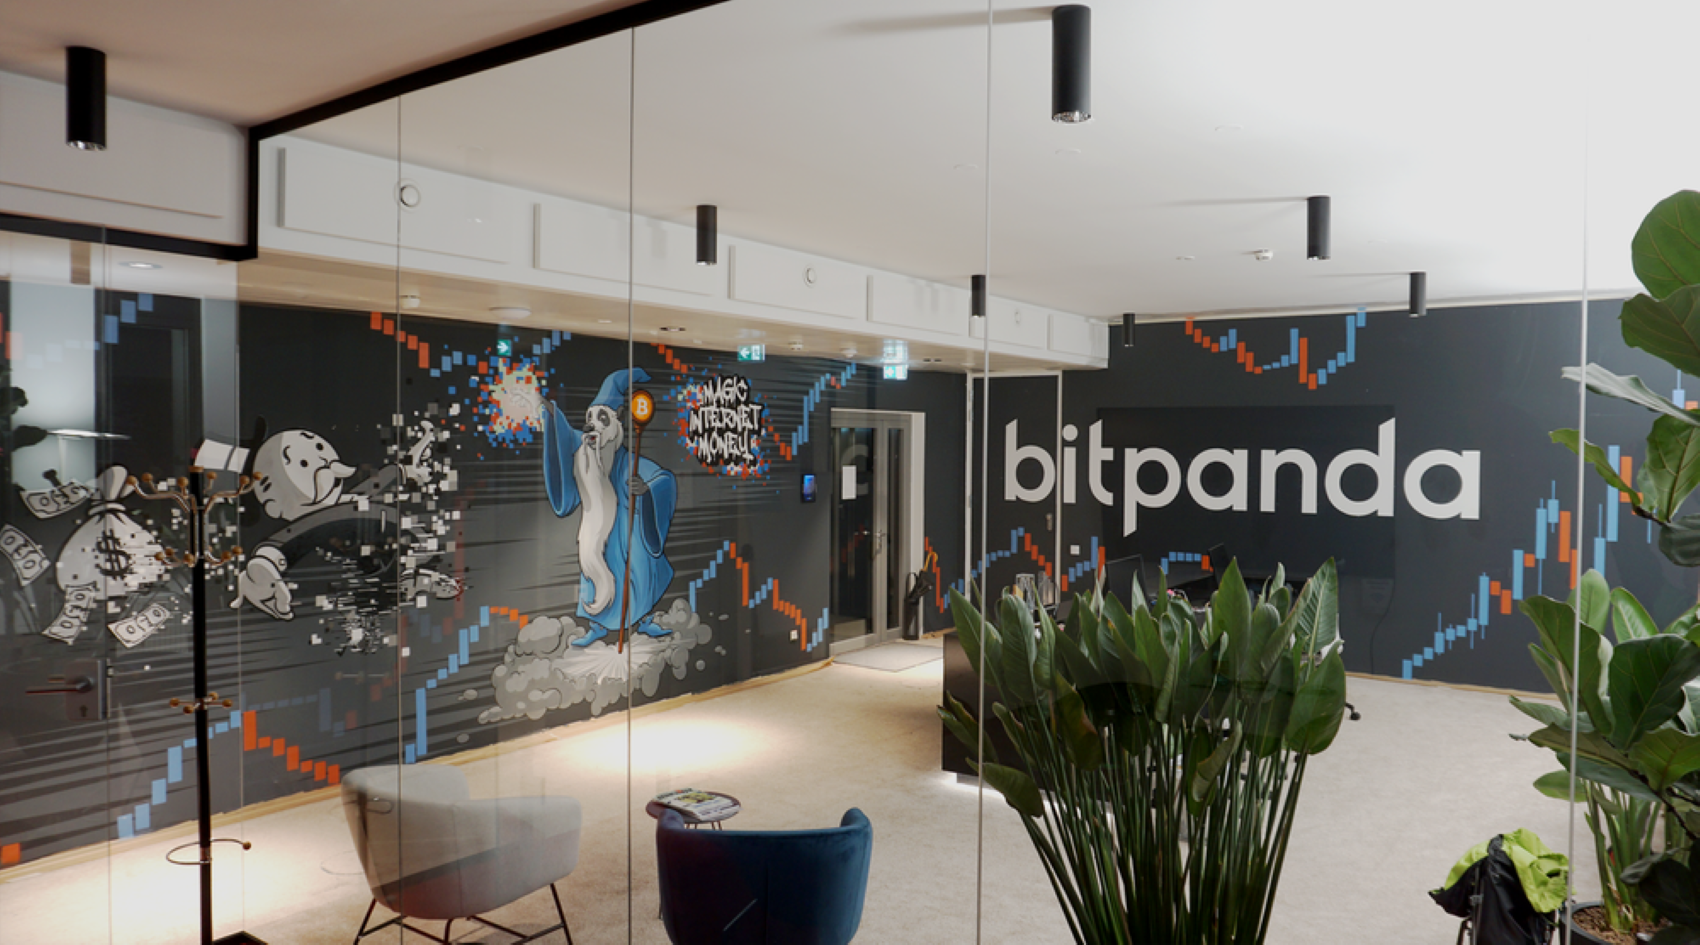 Bitpanda establishes in Barcelona its new Tech Hub and will hire 100 employees